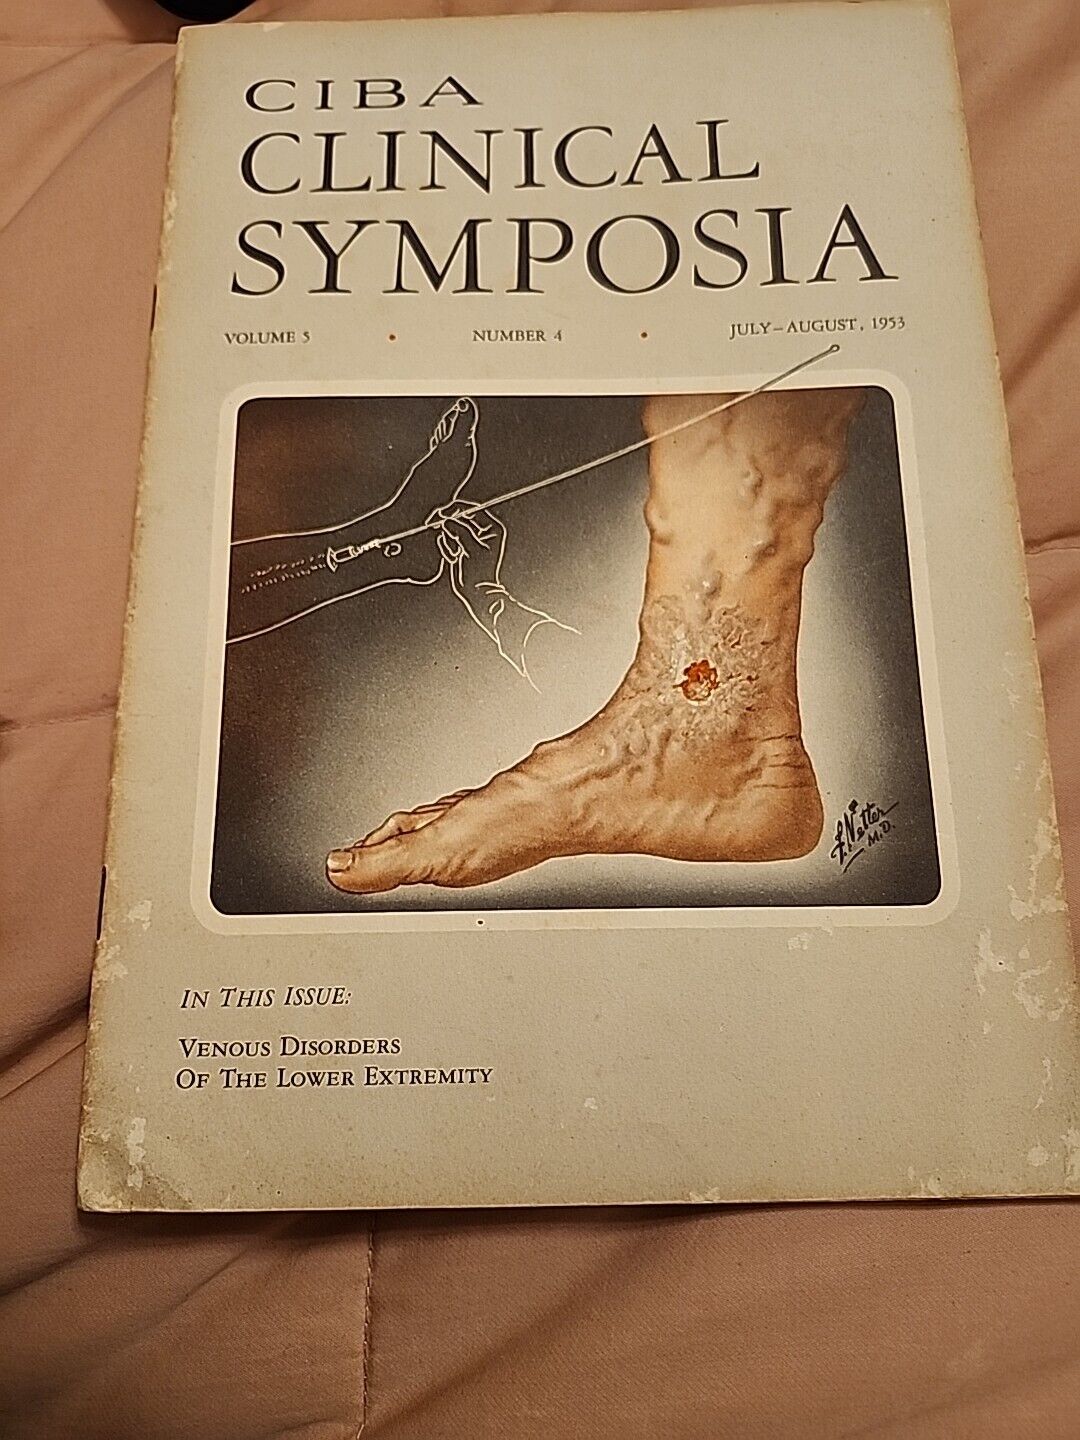 ciba clinical symposia July /August 1953